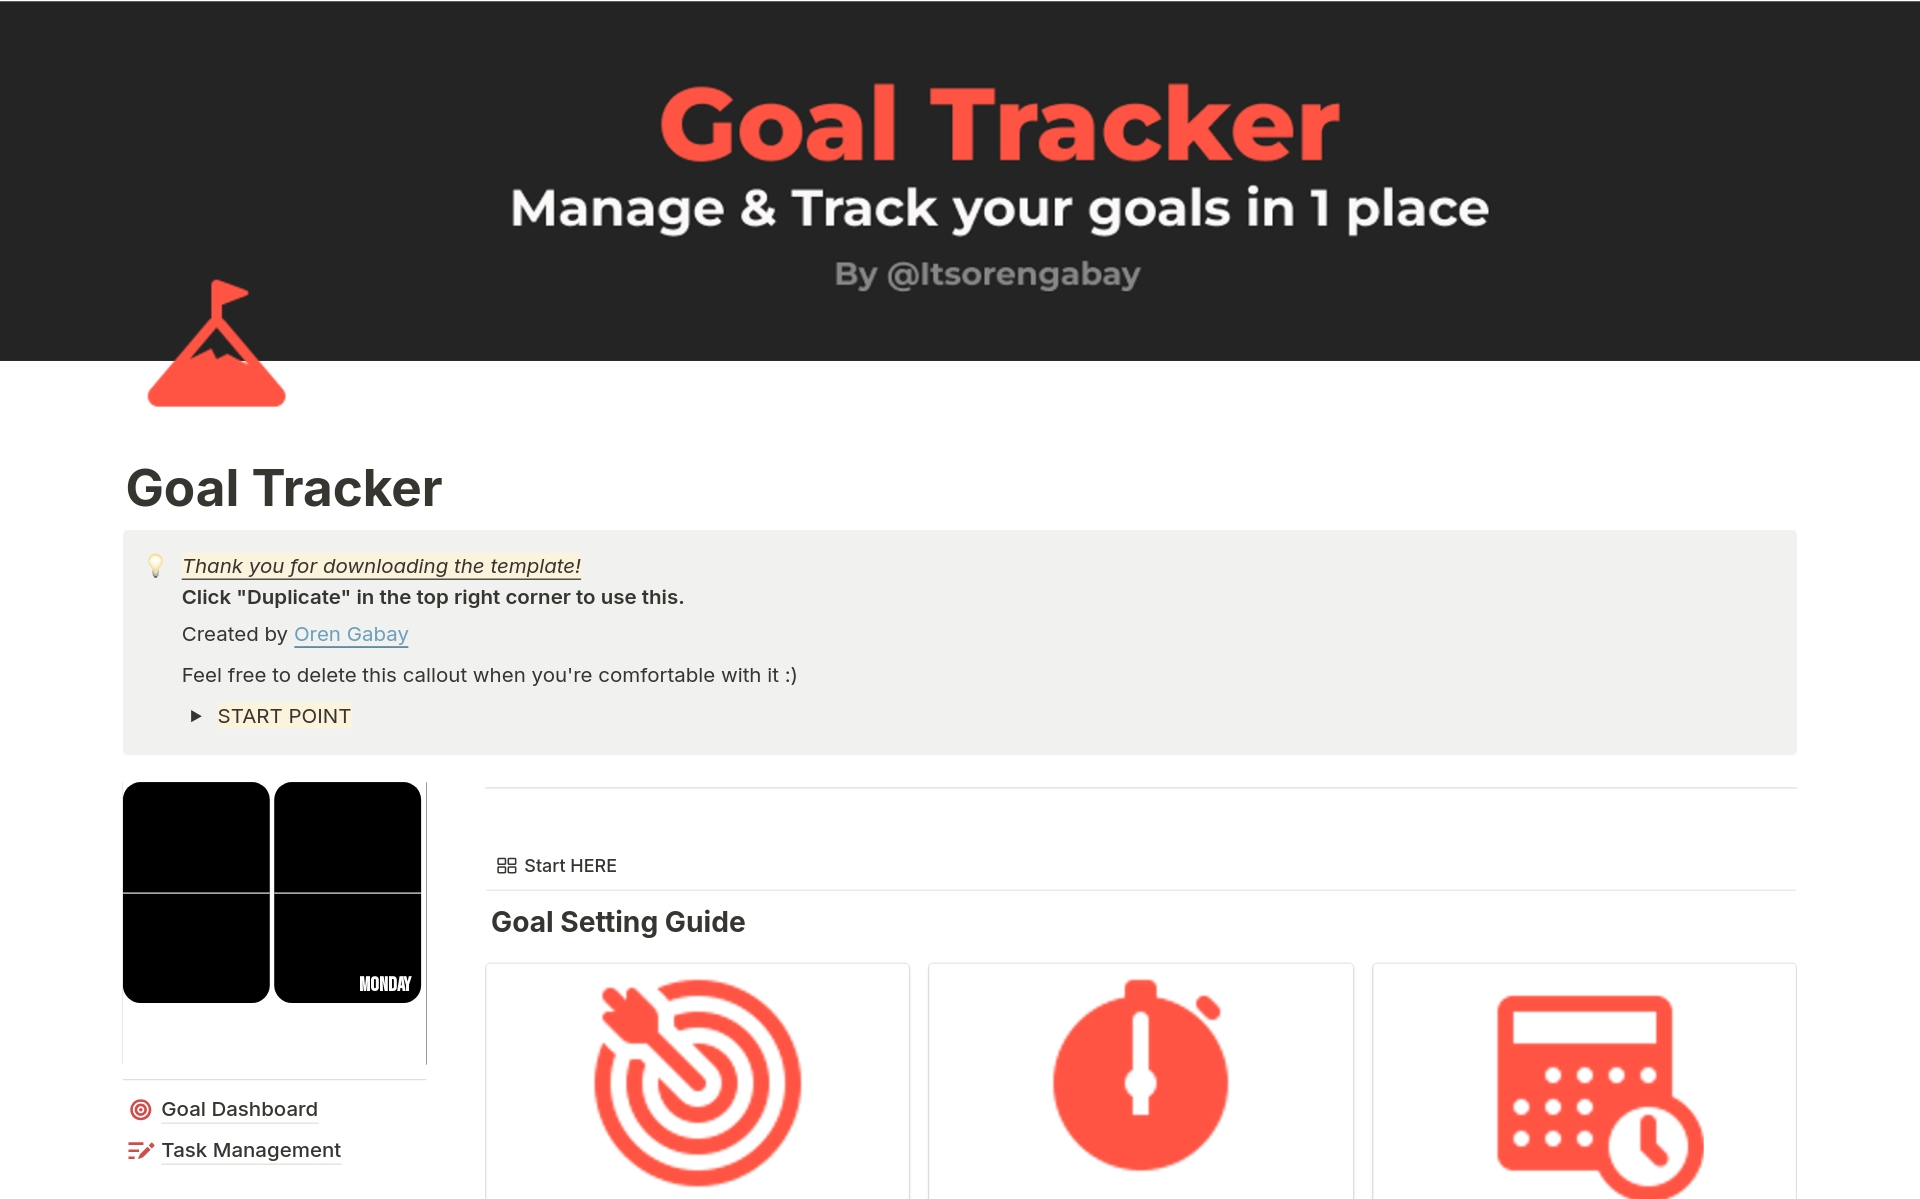 Track your goals & manage your tasks effectively to crush your goals with this template.